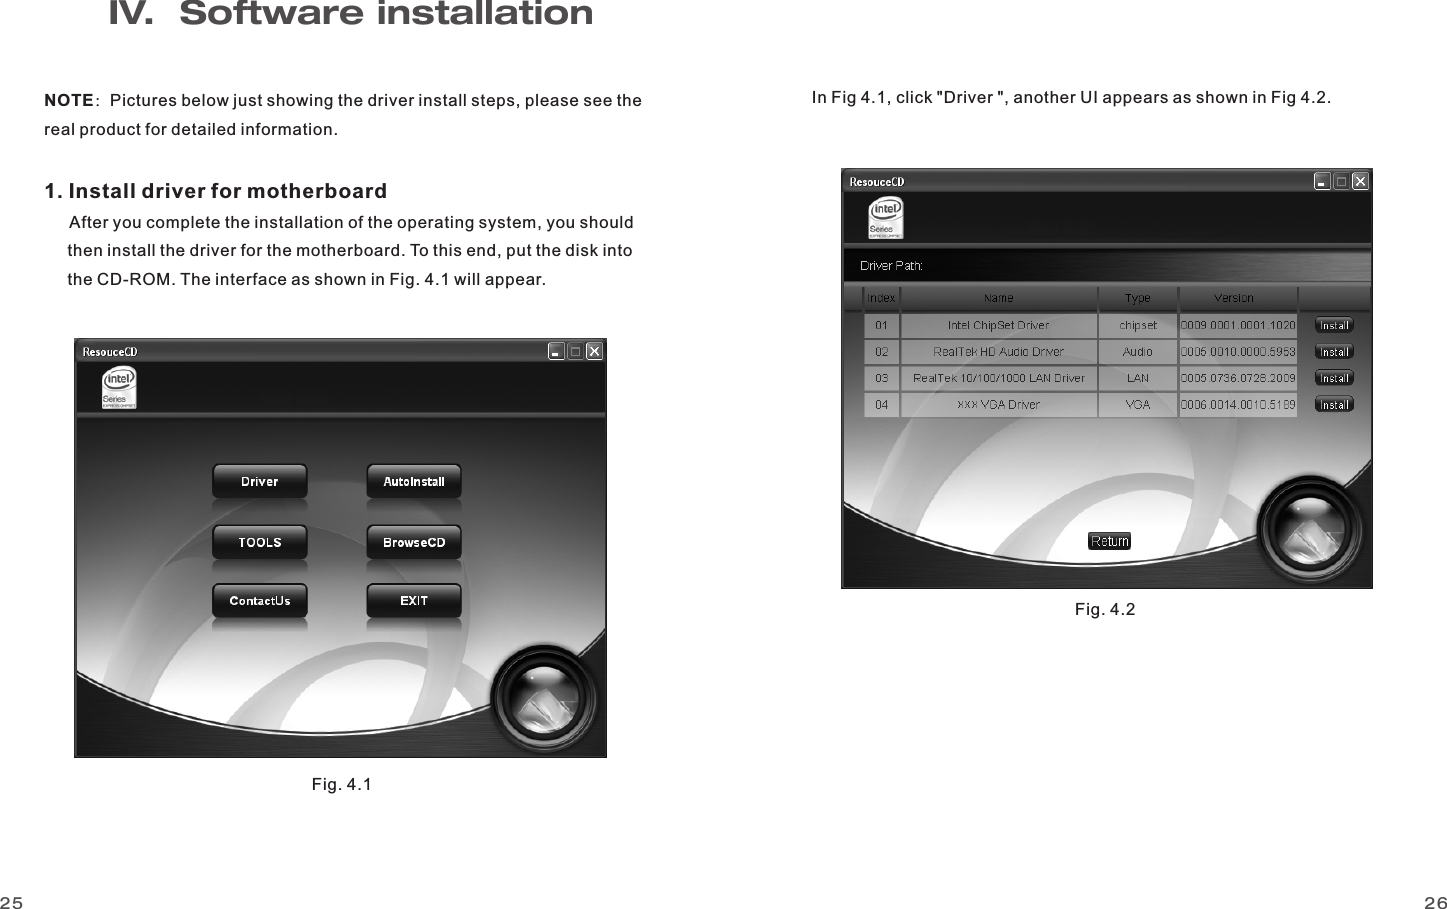 2625NOTE：Pictures below just showing the driver install steps, please see the real product for detailed information.1. Install driver for motherboard   After you complete the installation of the operating system, you should      then install the driver for the motherboard. To this end, put the disk into      the CD-ROM. The interface as shown in Fig. 4.1 will appear. In Fig 4.1, click &quot;Driver &quot;, another UI appears as shown in Fig 4.2.IV.  Software installationFig. 4.1 Fig. 4.2 www.giadatech.com